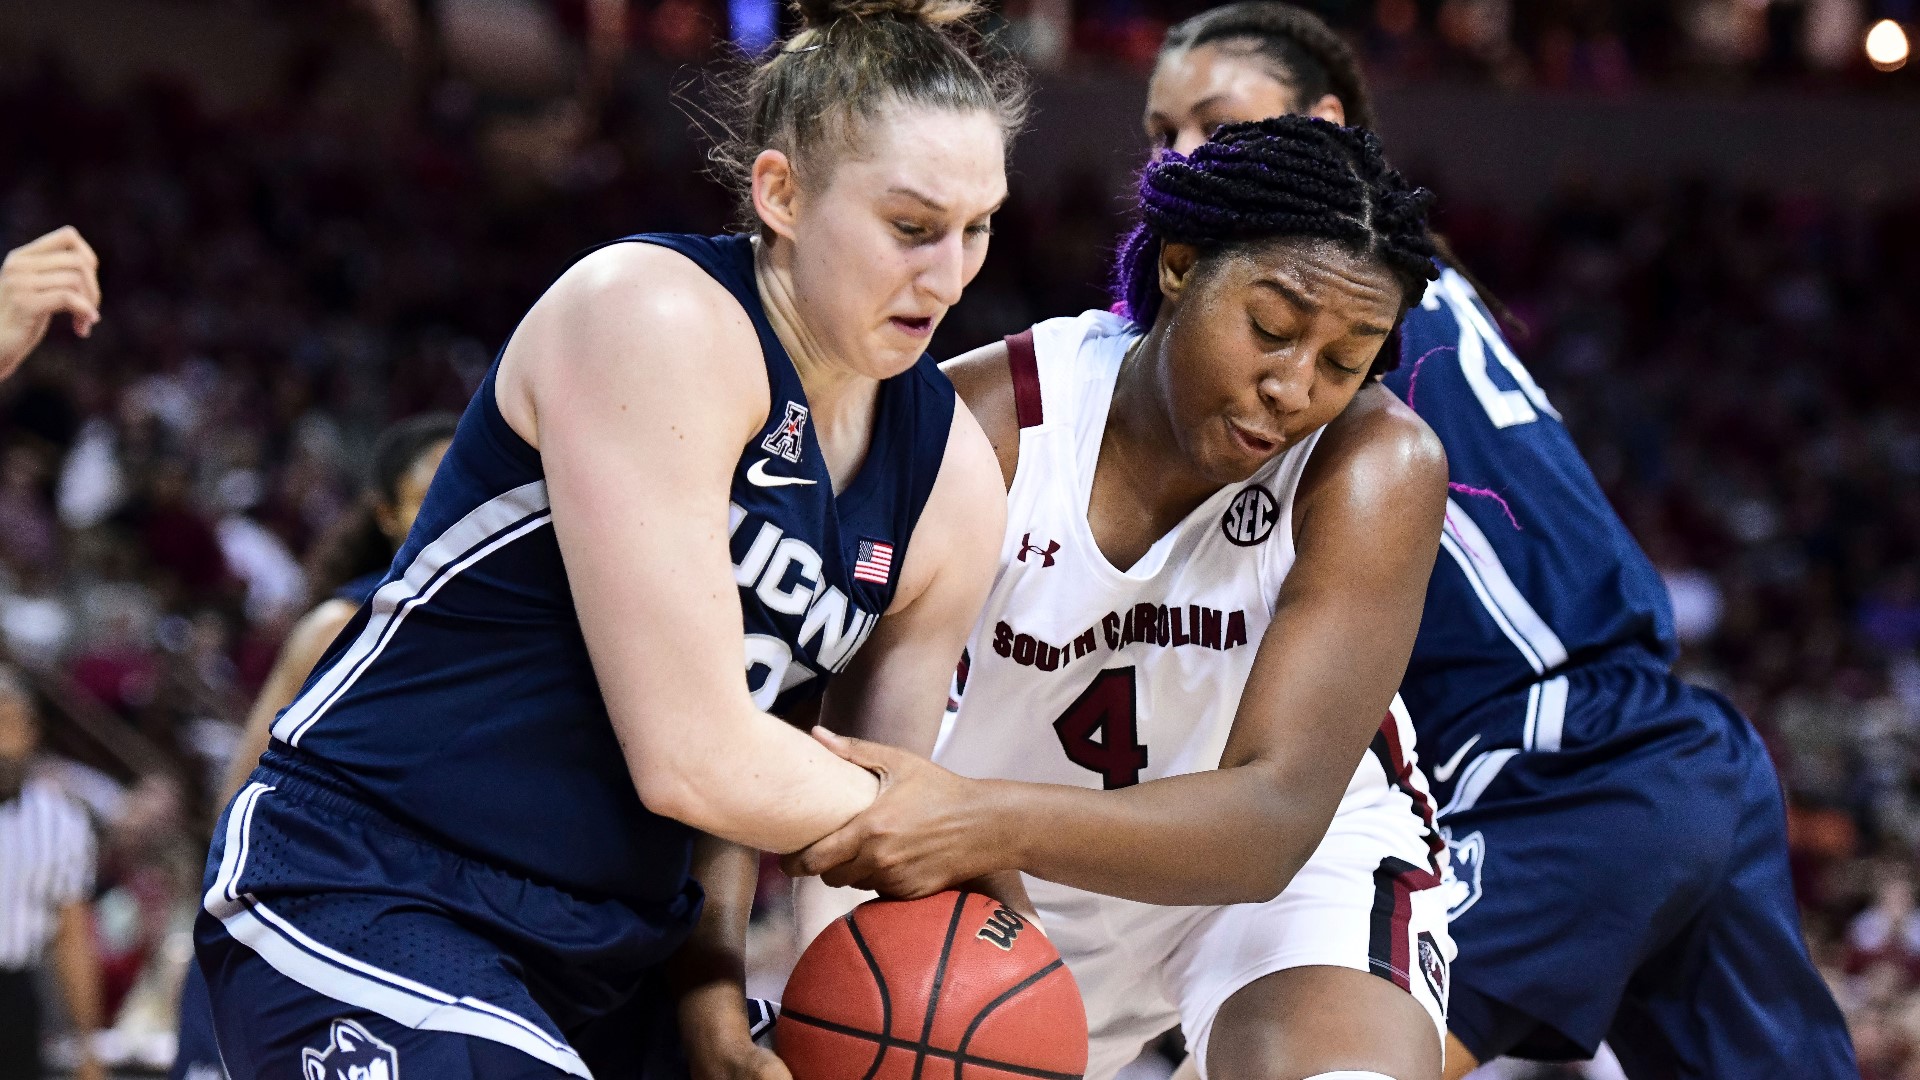 South Carolina had lost all eight meetings with Huskies before Monday night's game.